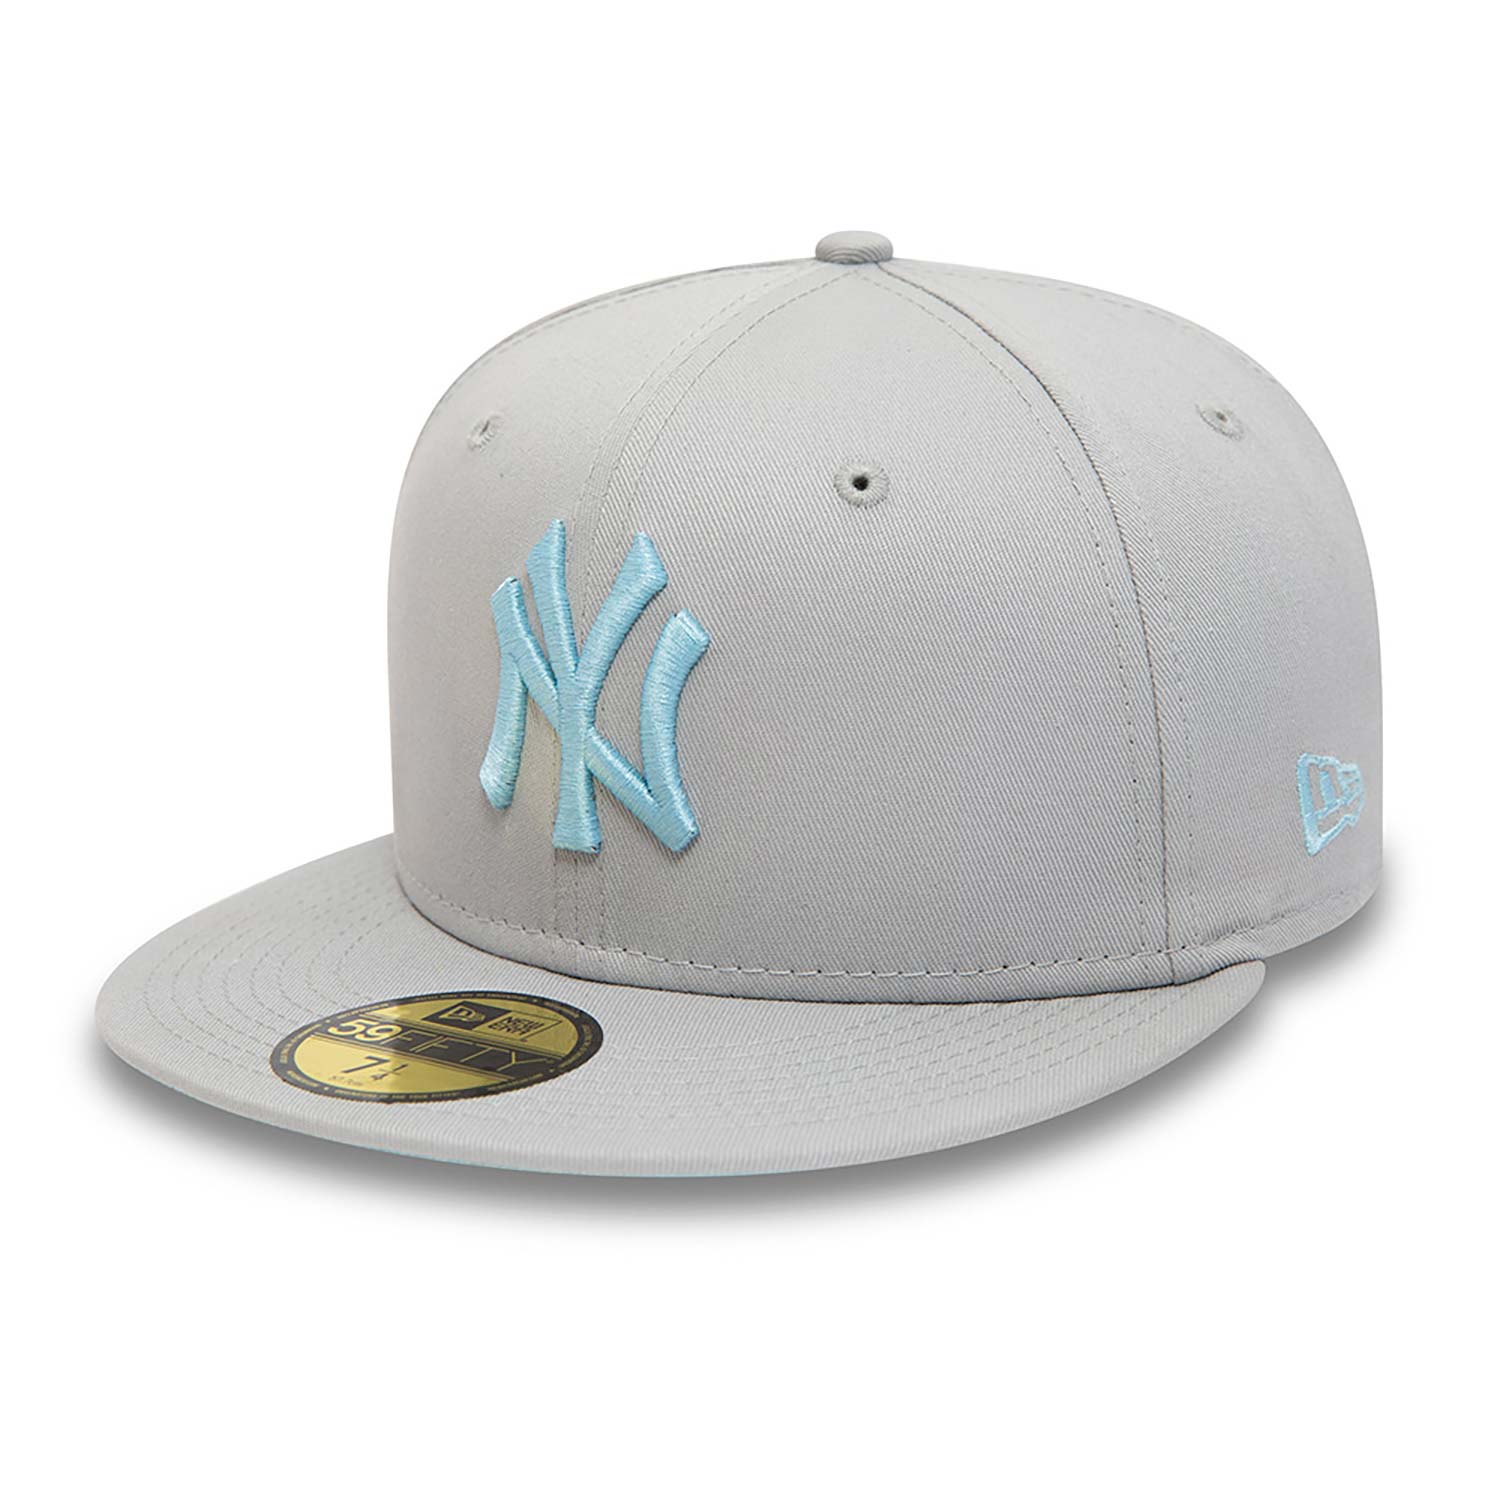 https://www.neweracap.eu/globalassets/products/c2_28/60358158/new-york-yankees-league-essential-grey-59fifty-fitted-cap-60358158-left.jpg